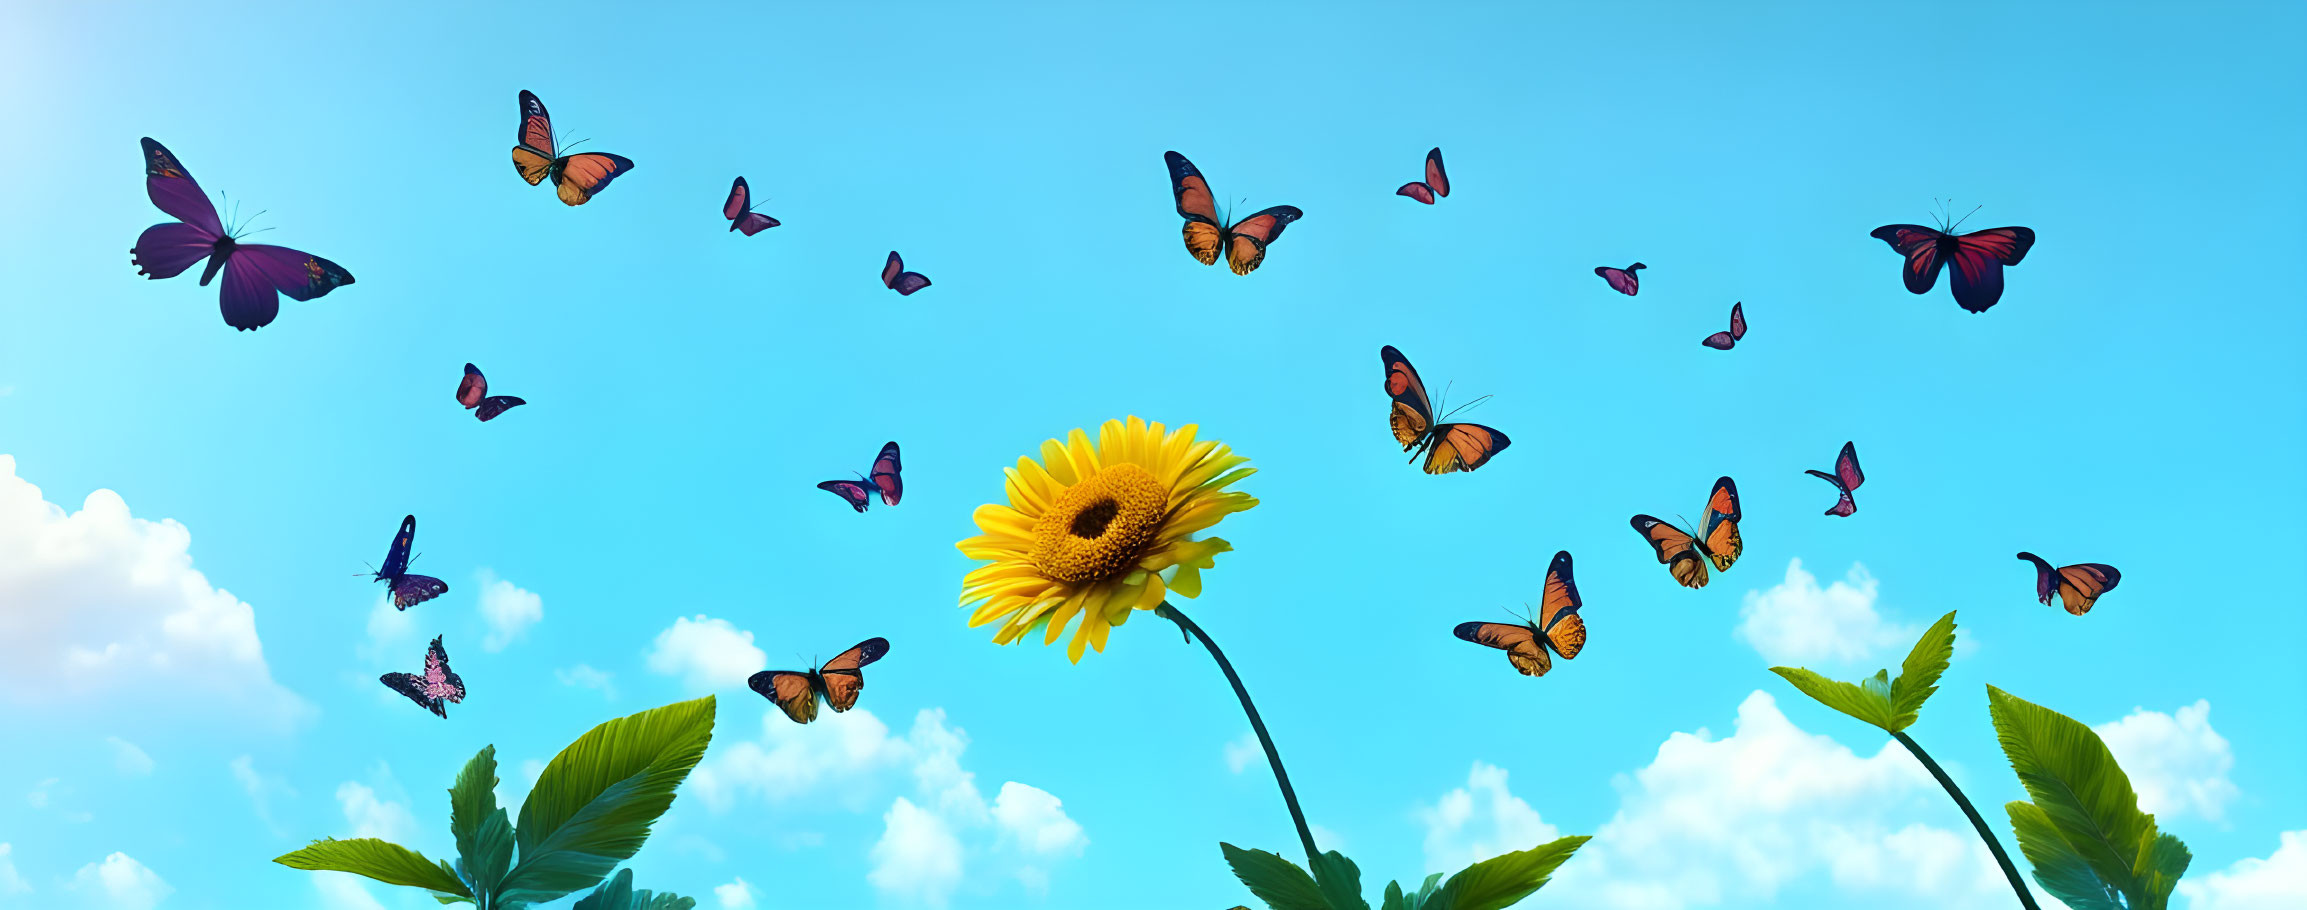 Sunflower and butterflies in vibrant nature scene